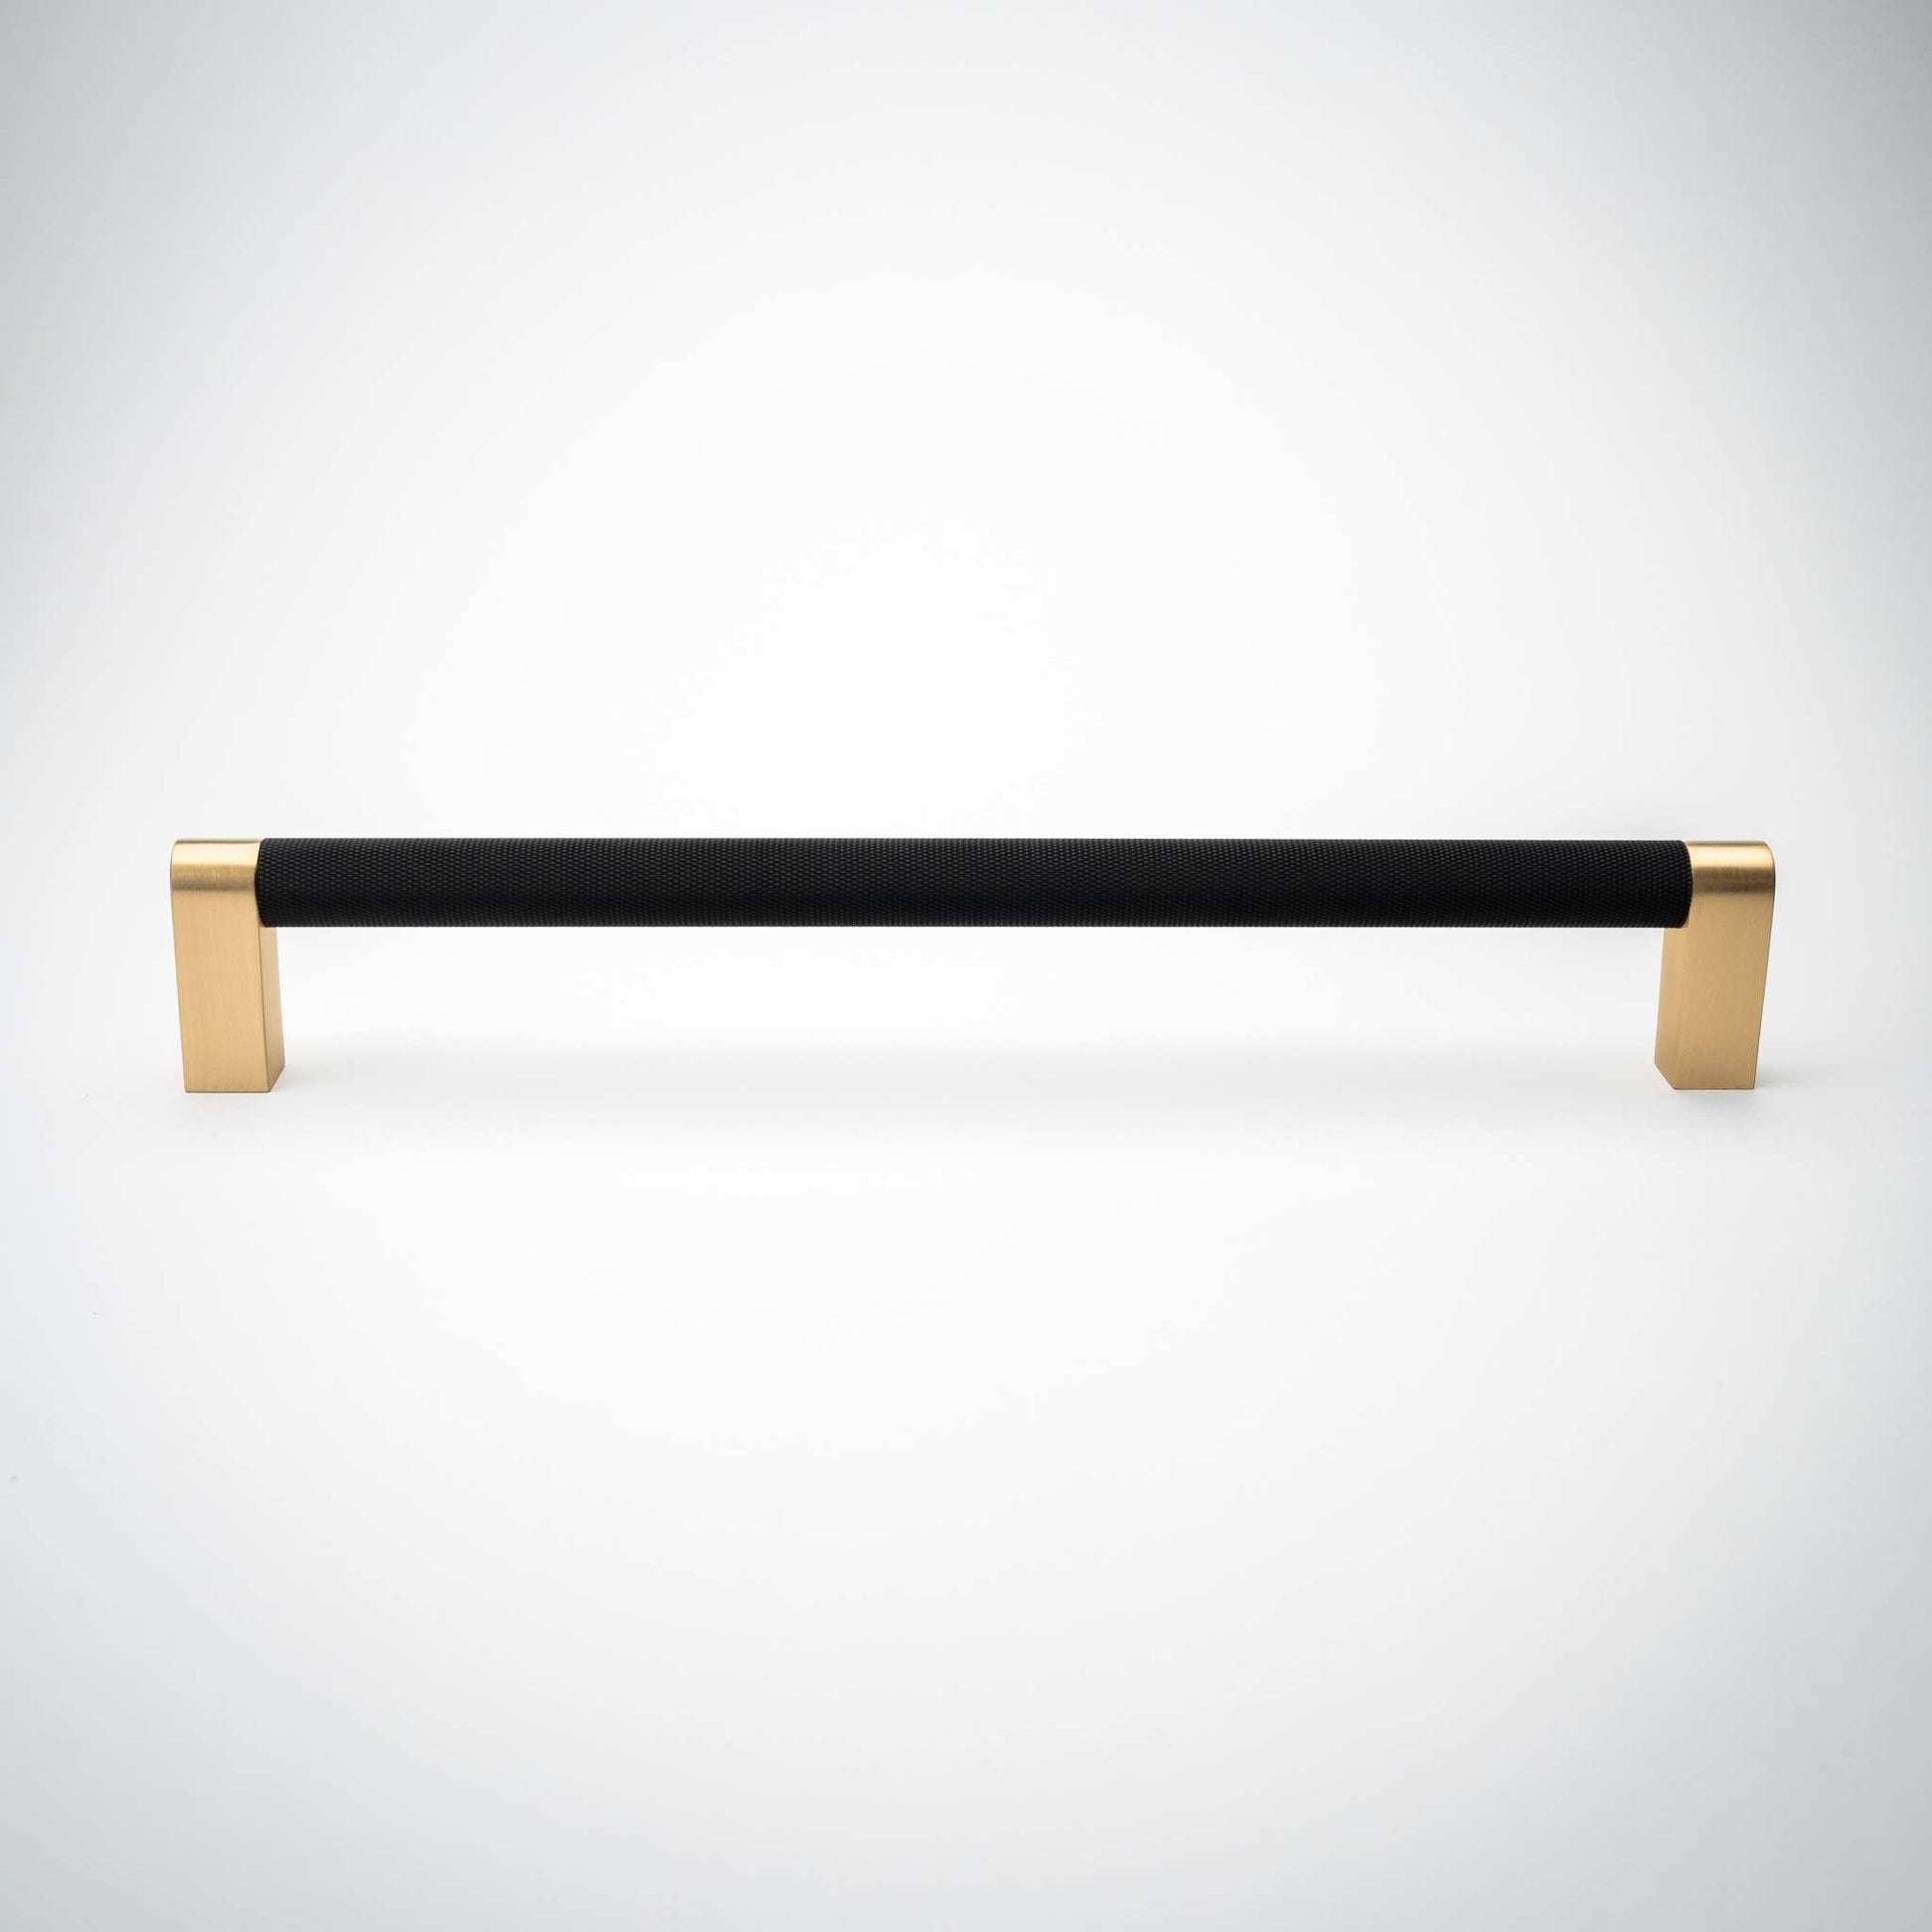 Bold, Black & Gold Knurled Cabinet Pulls Go BOLD in your home!Our Bold, Black and "gold" cabinet pull brings a modern feel to your cabinetry. Its two-toned style is visually fresh, while its knurled matpullBold, Black & Gold Knurled Solid Brass Cabinet Pulls